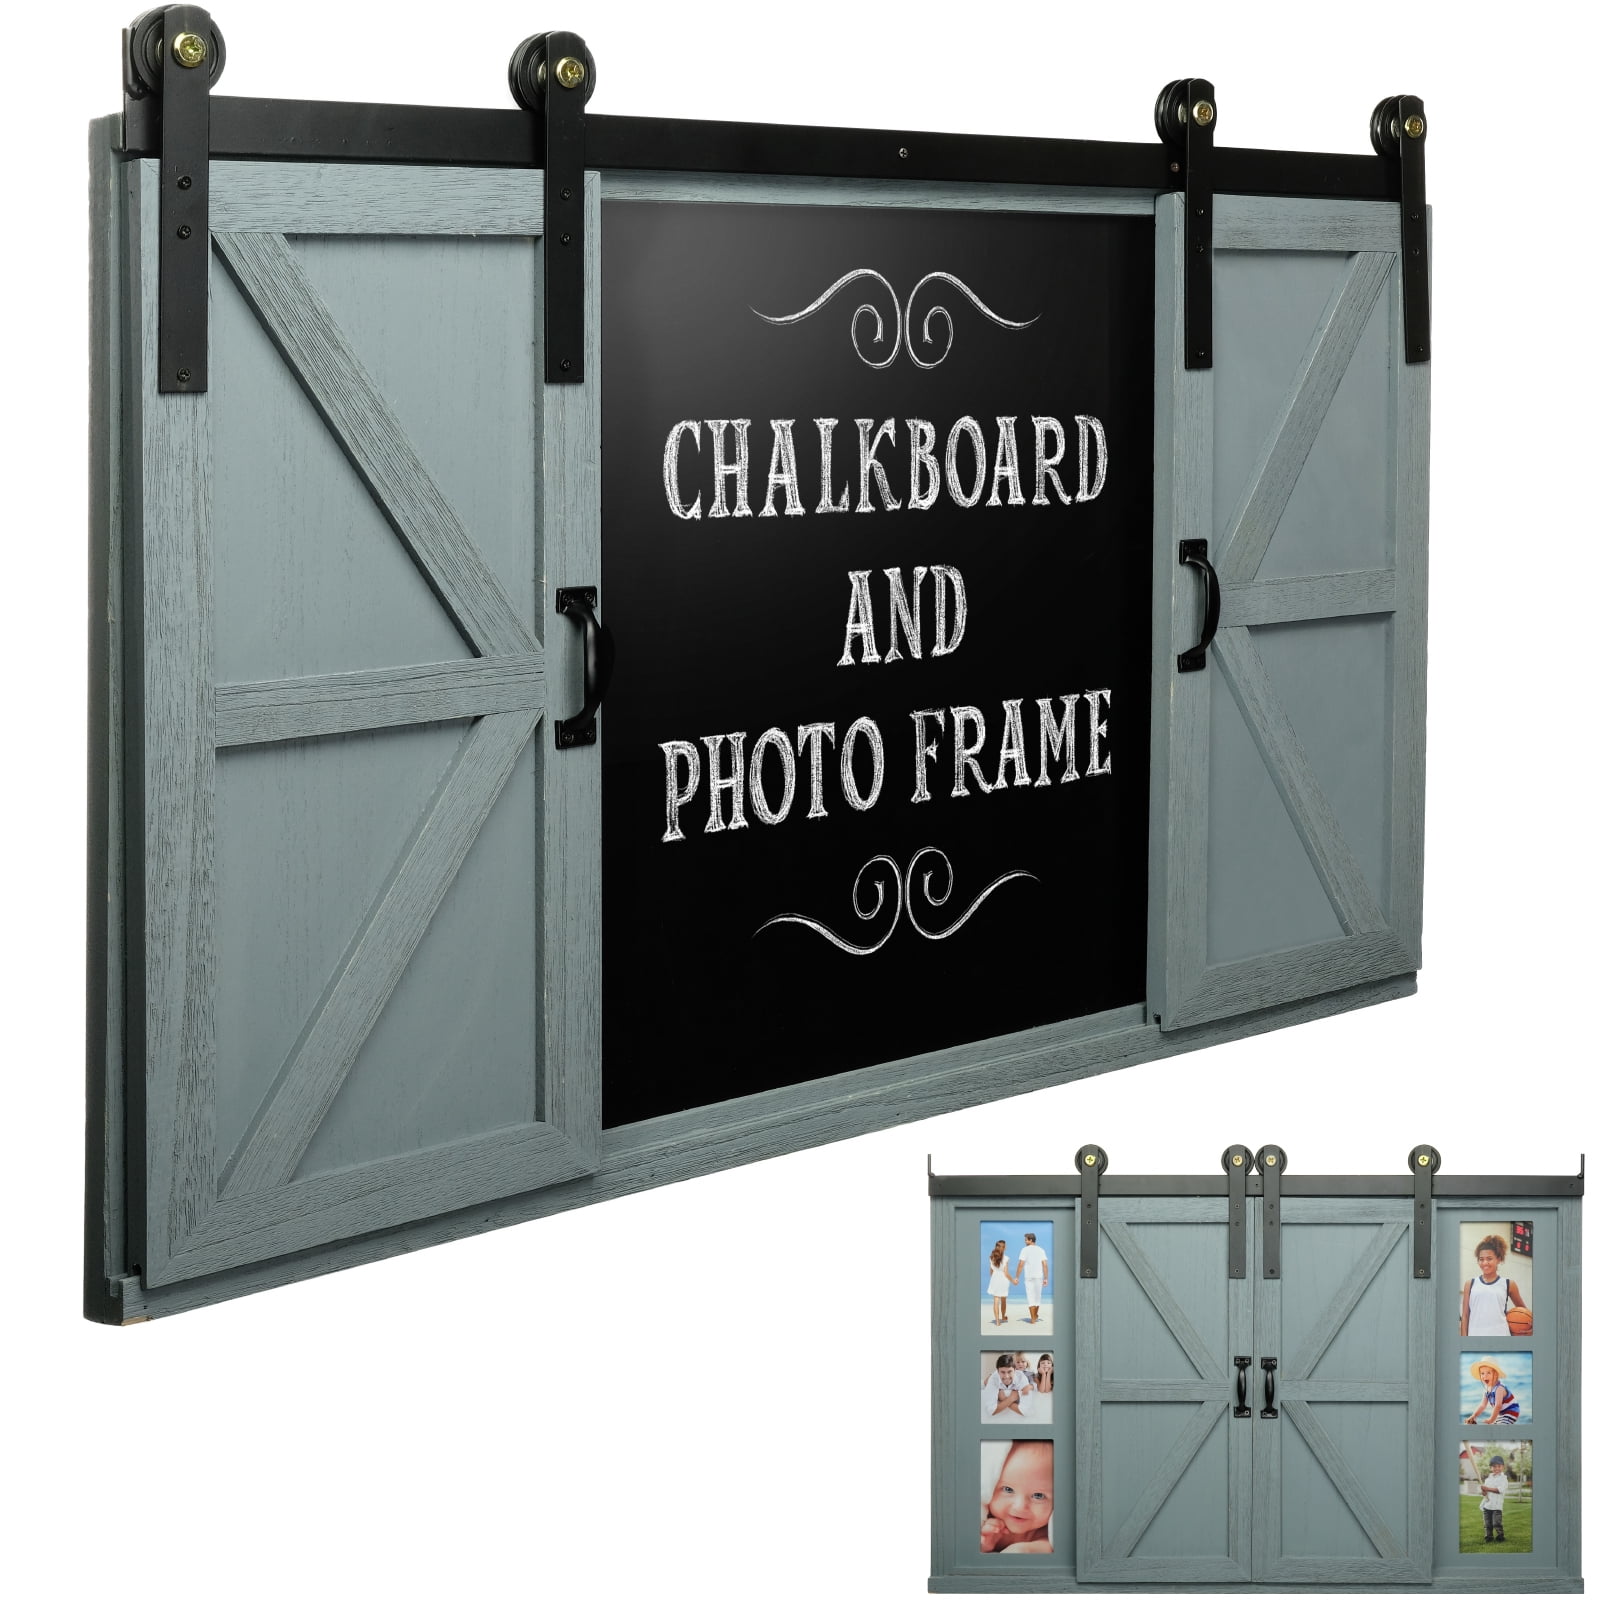 Composition Wall Mounted Chalkboard Size: 4' H x 6' L